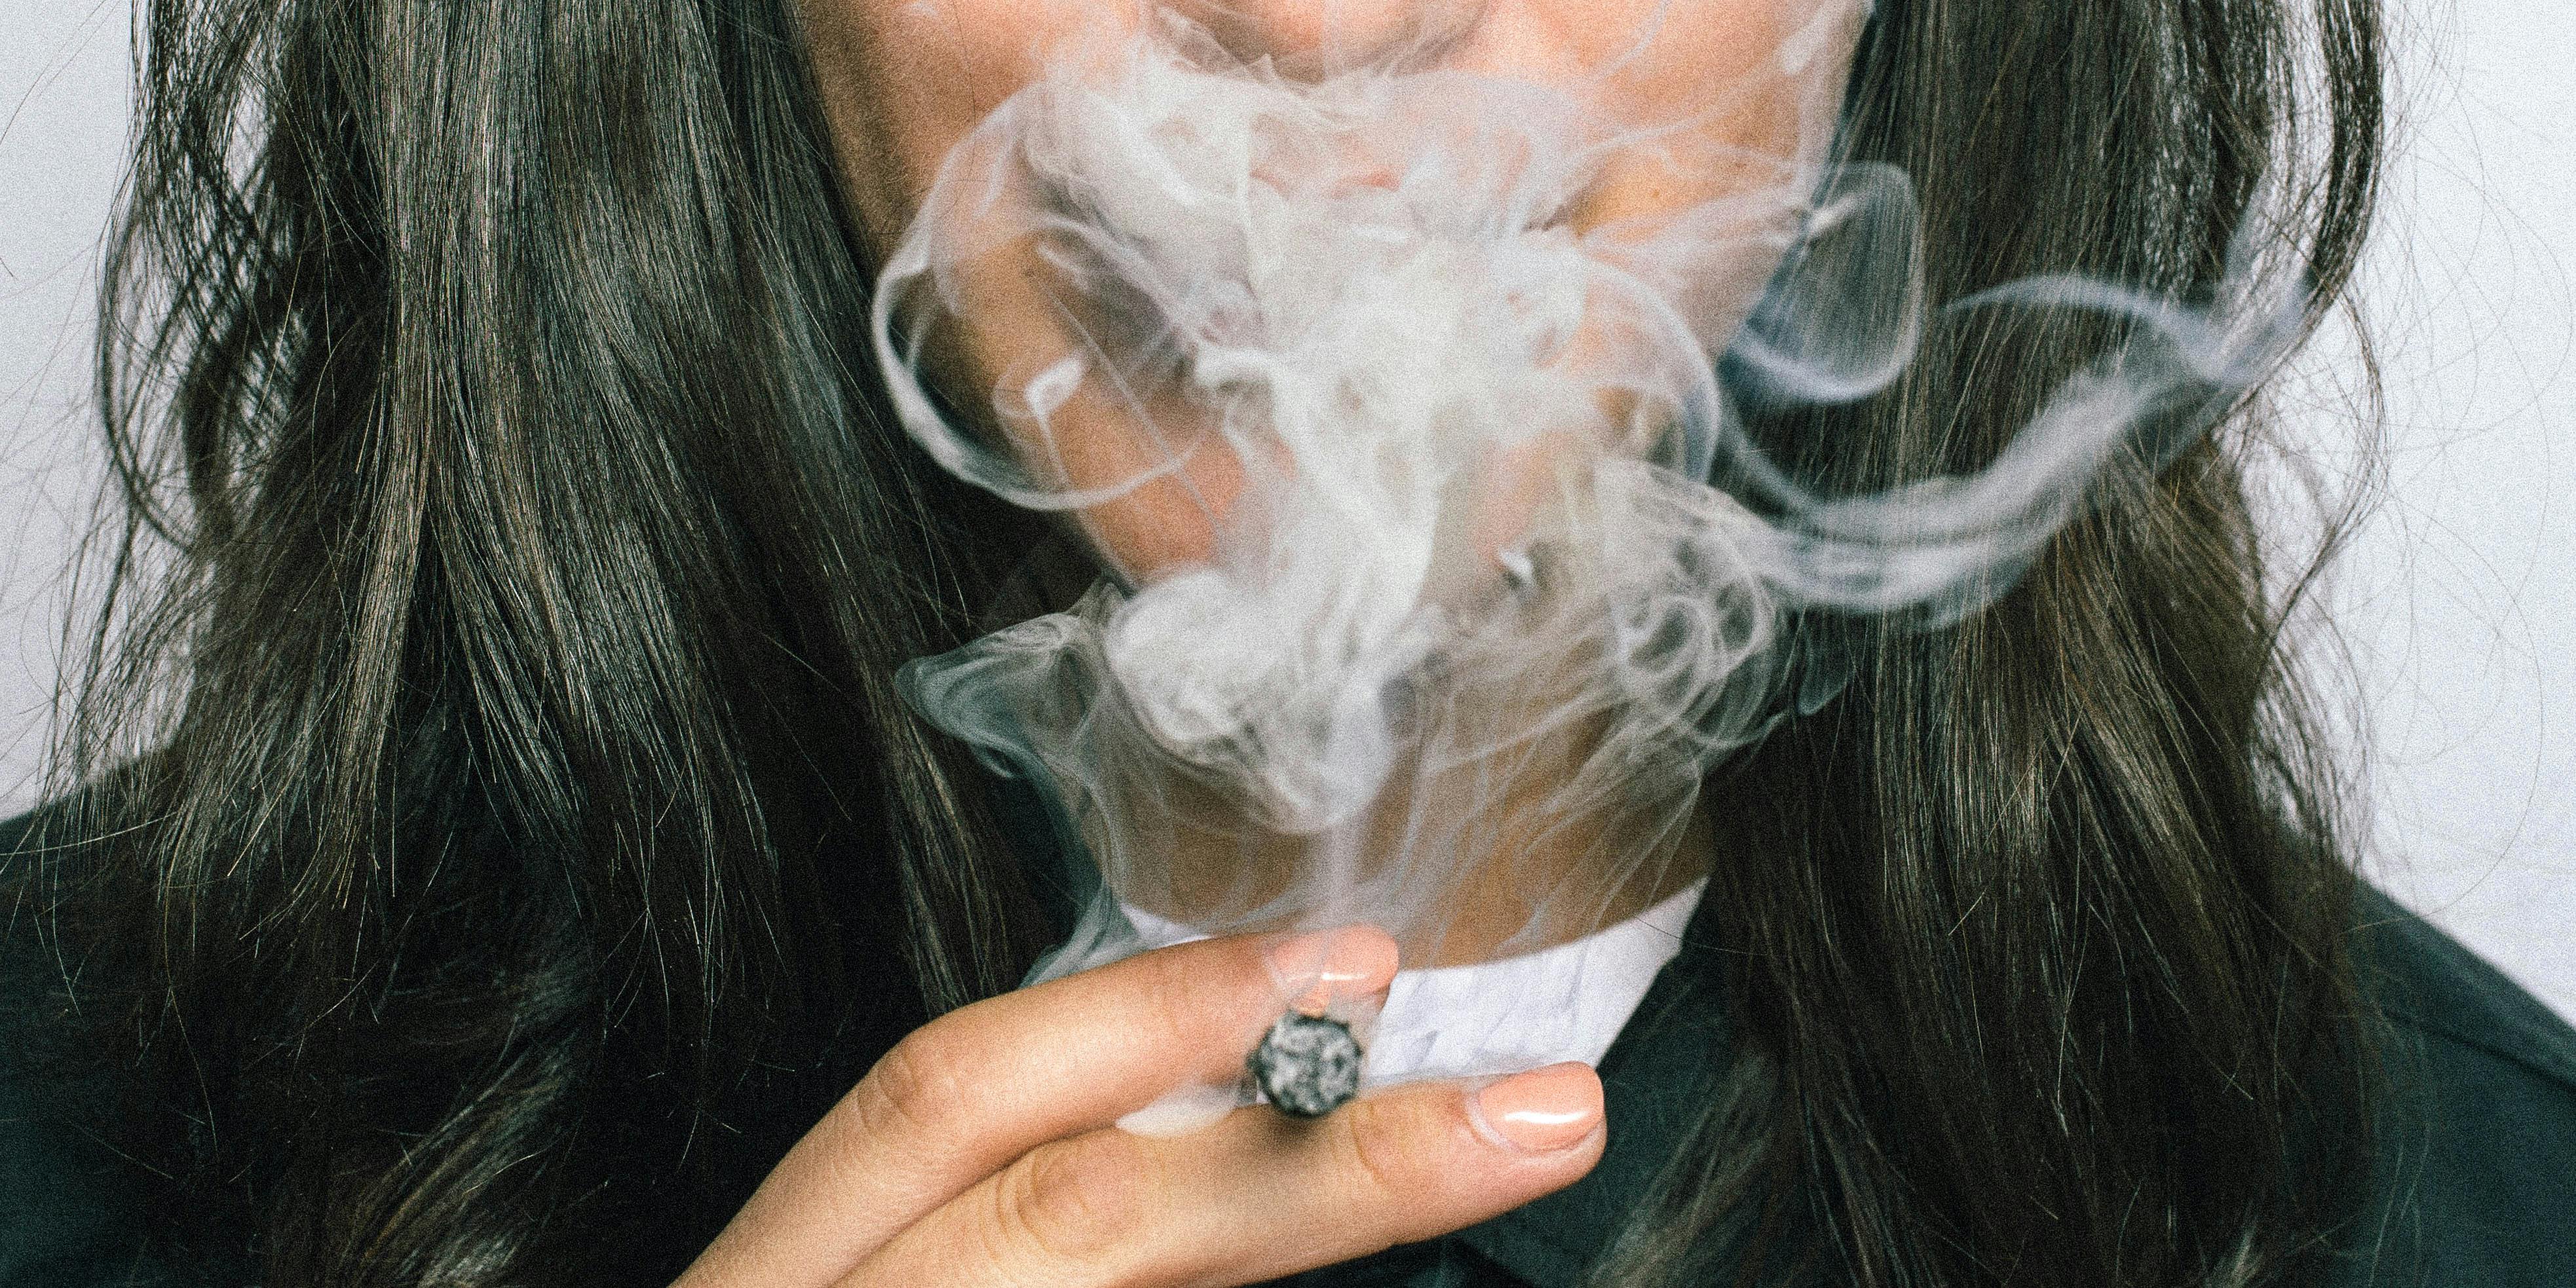 Children Whose Mothers Use Cannabis Try It At A Younger Age. Here, a woman is shown smoking